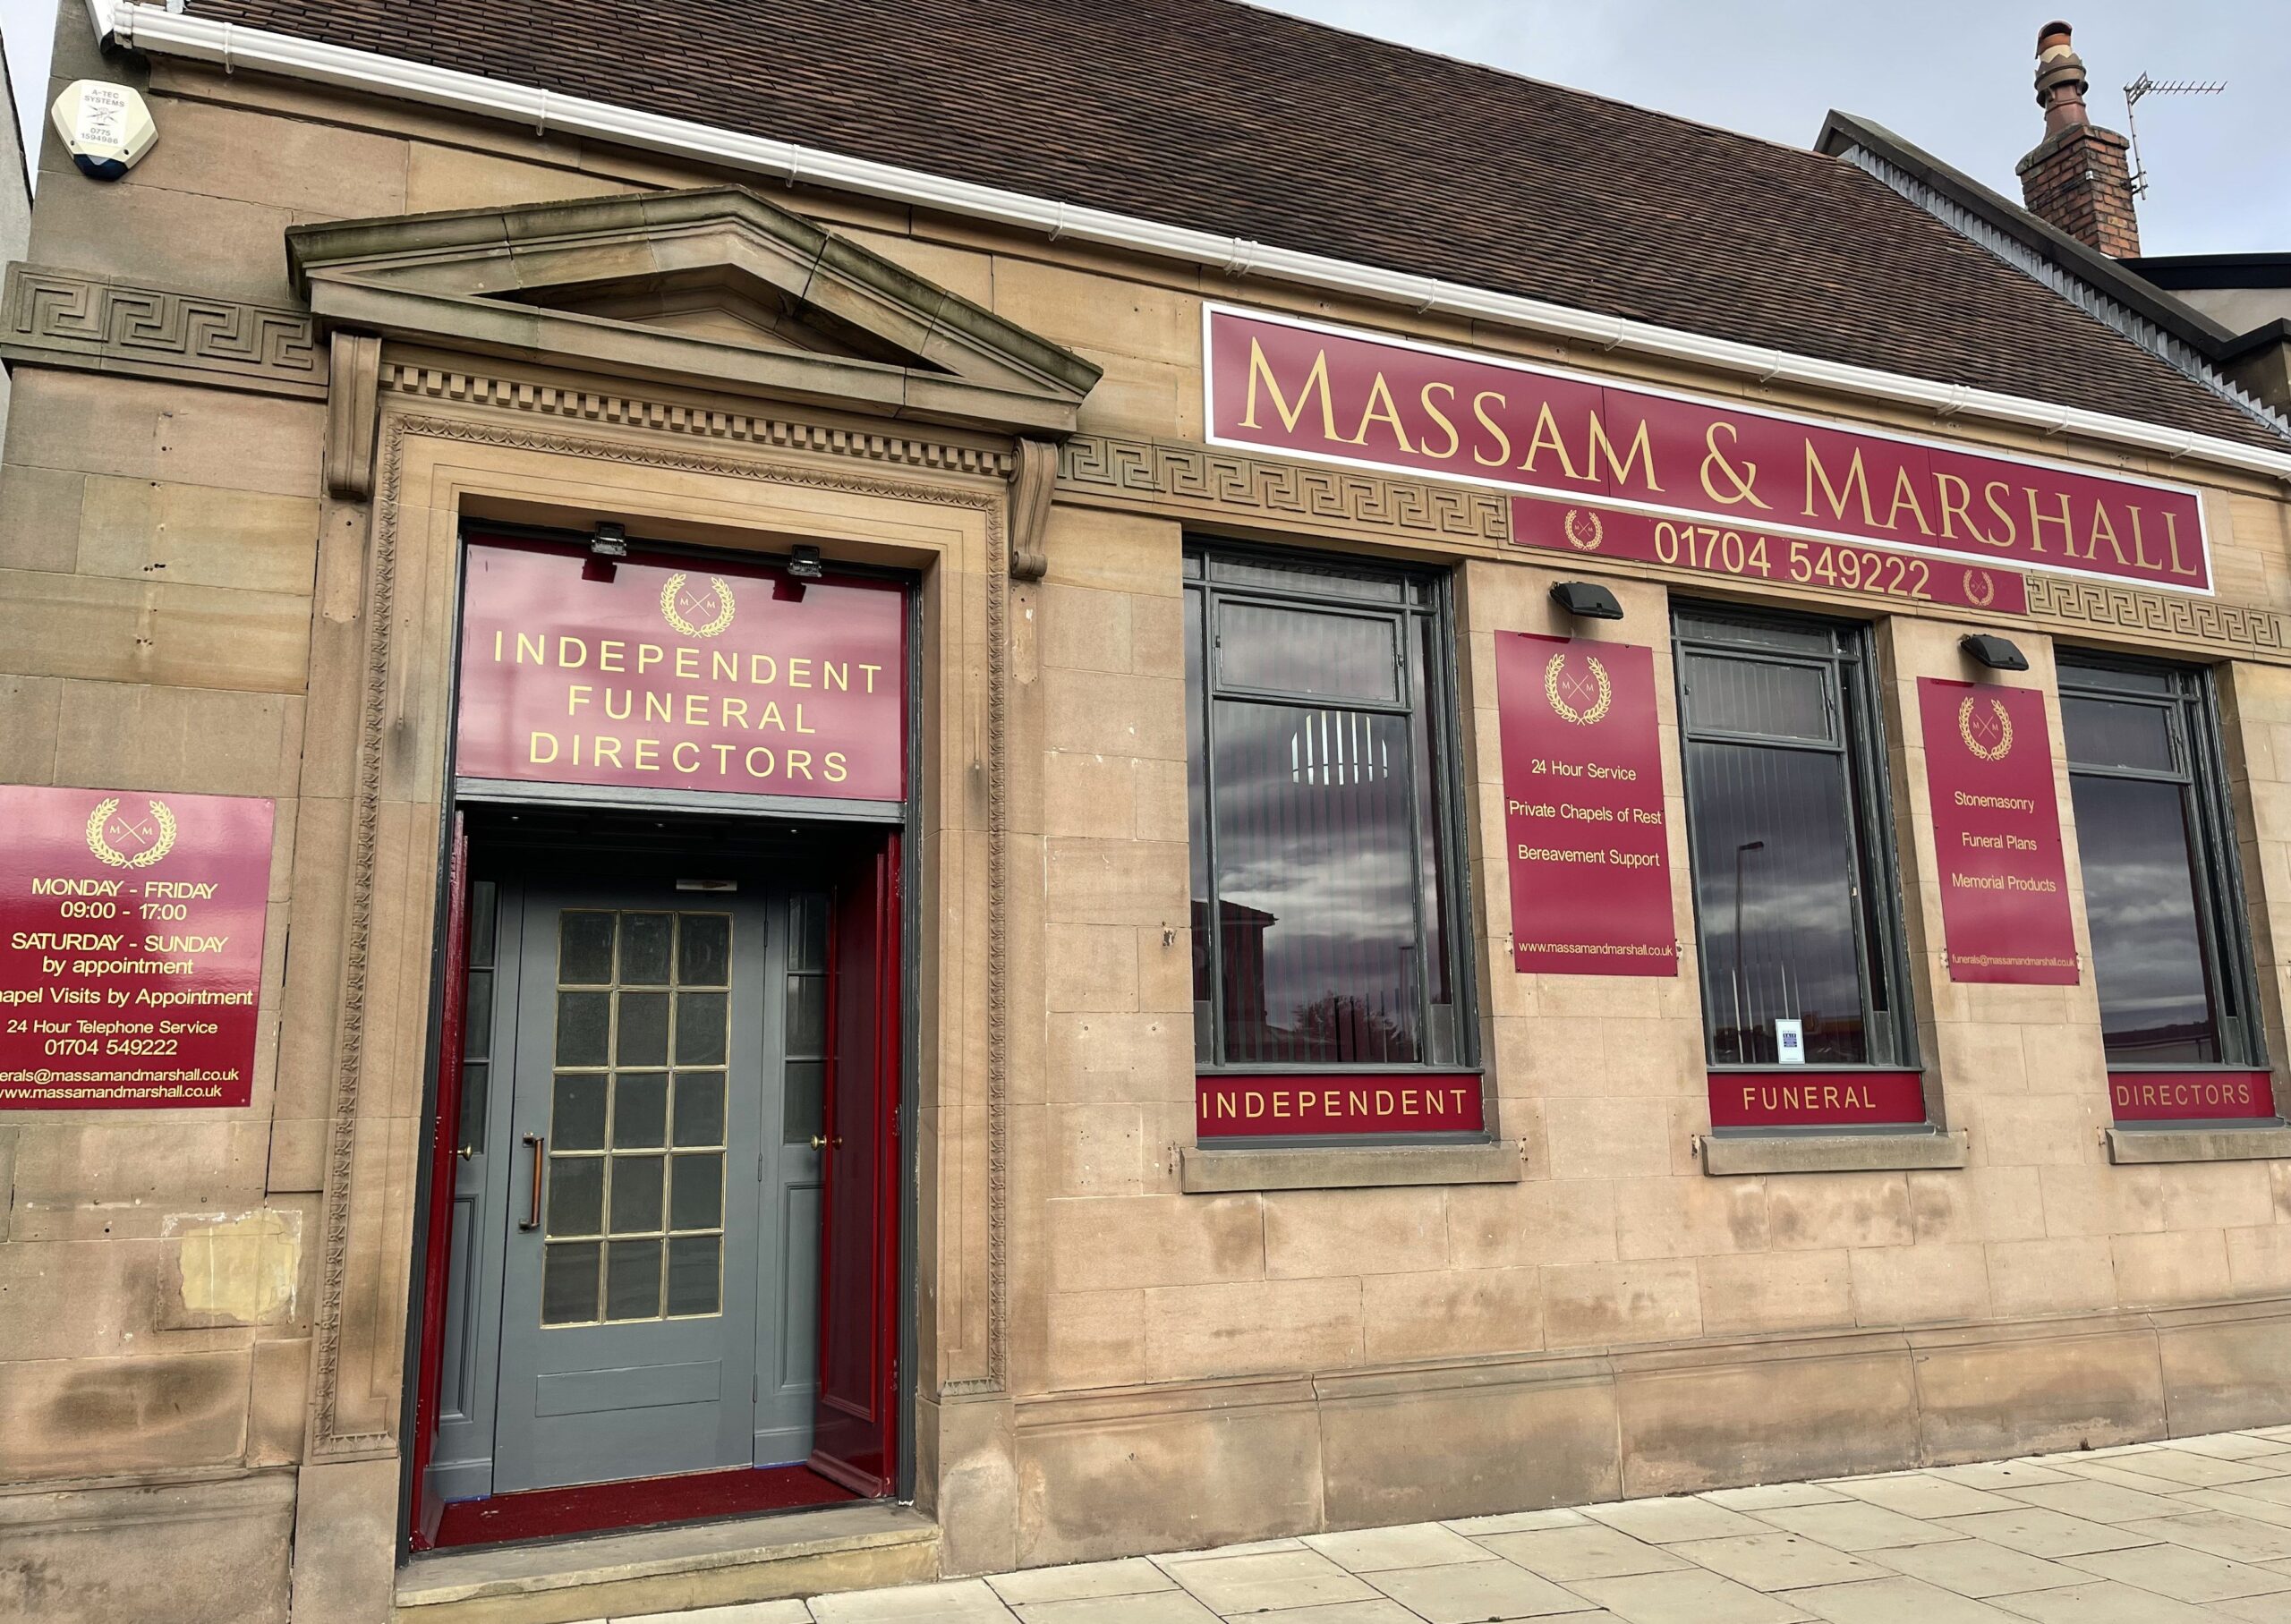 Massam and Marshall funeral directors on Manchester Road in Southport